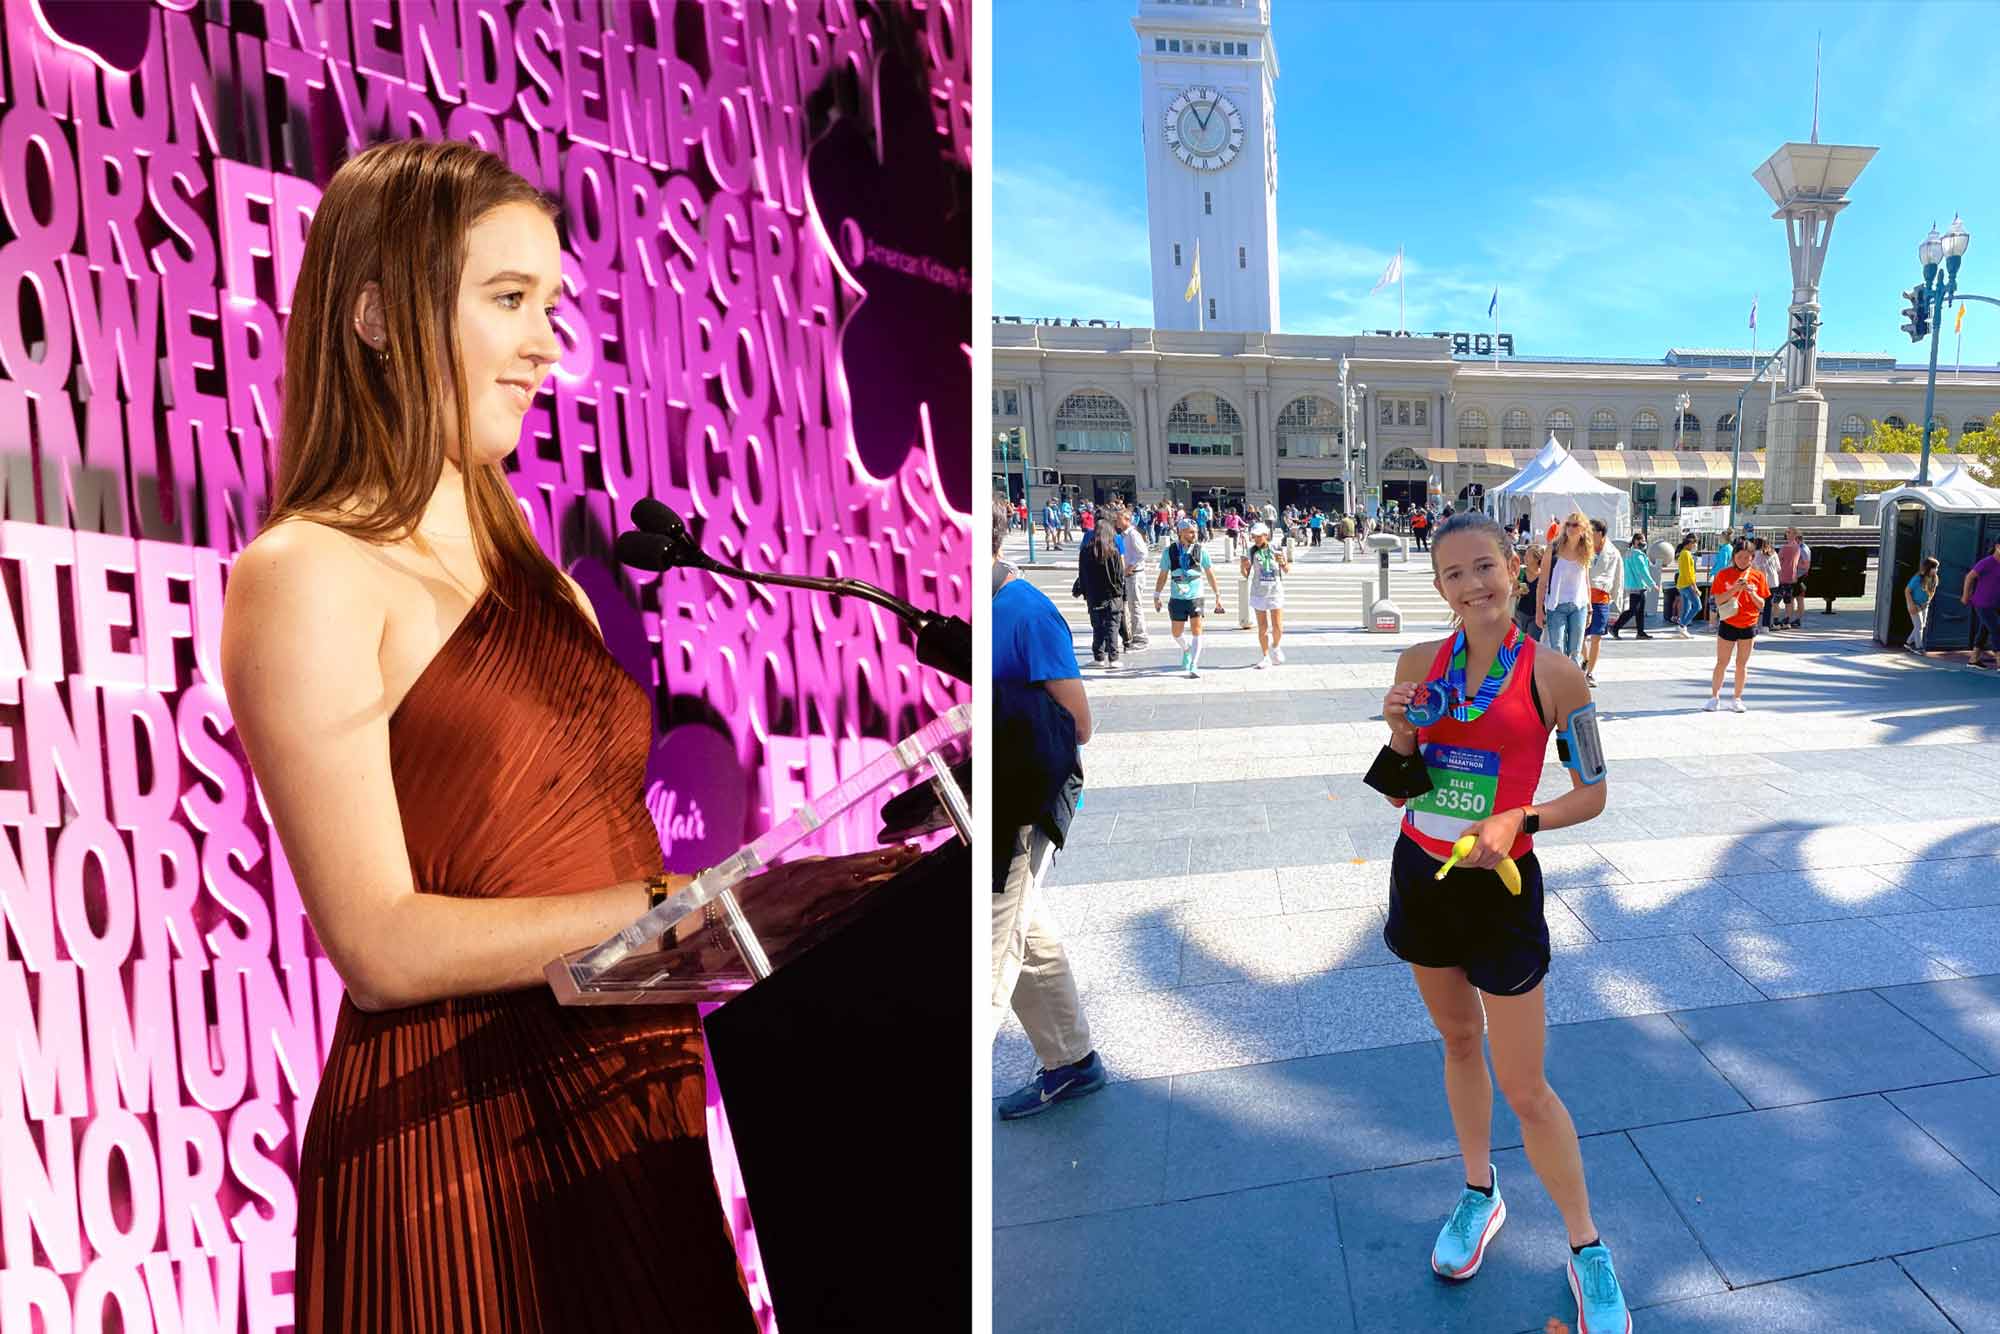 To the left Ellie Hanley speaking at a podium, and to the right standing outside after running a race